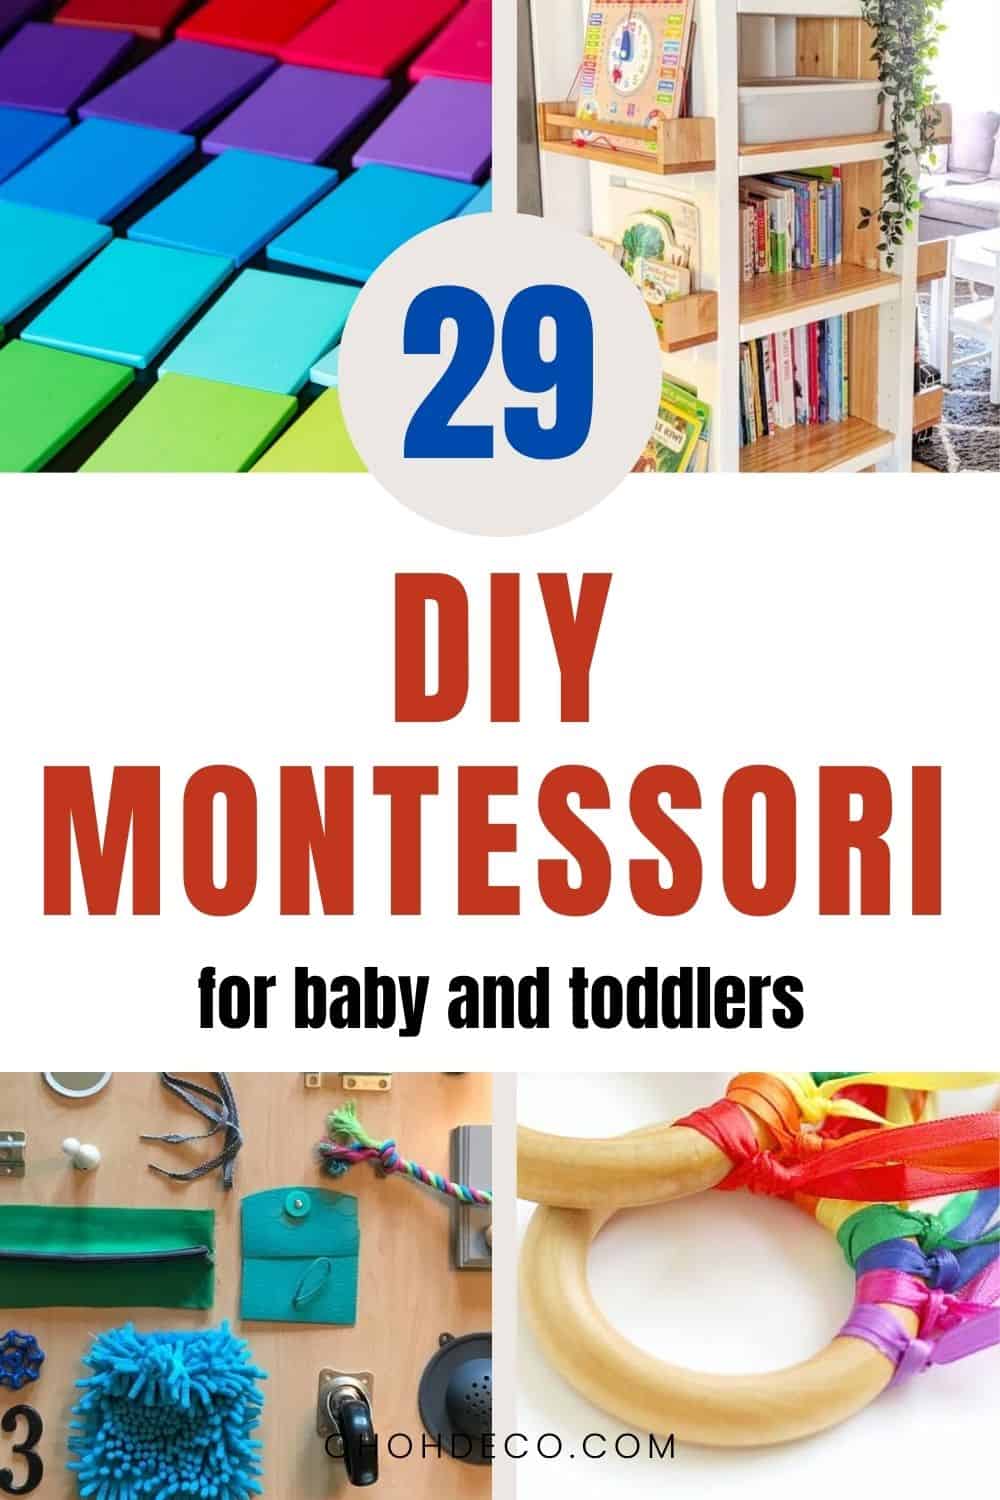 diy montessori for baby and toddlers